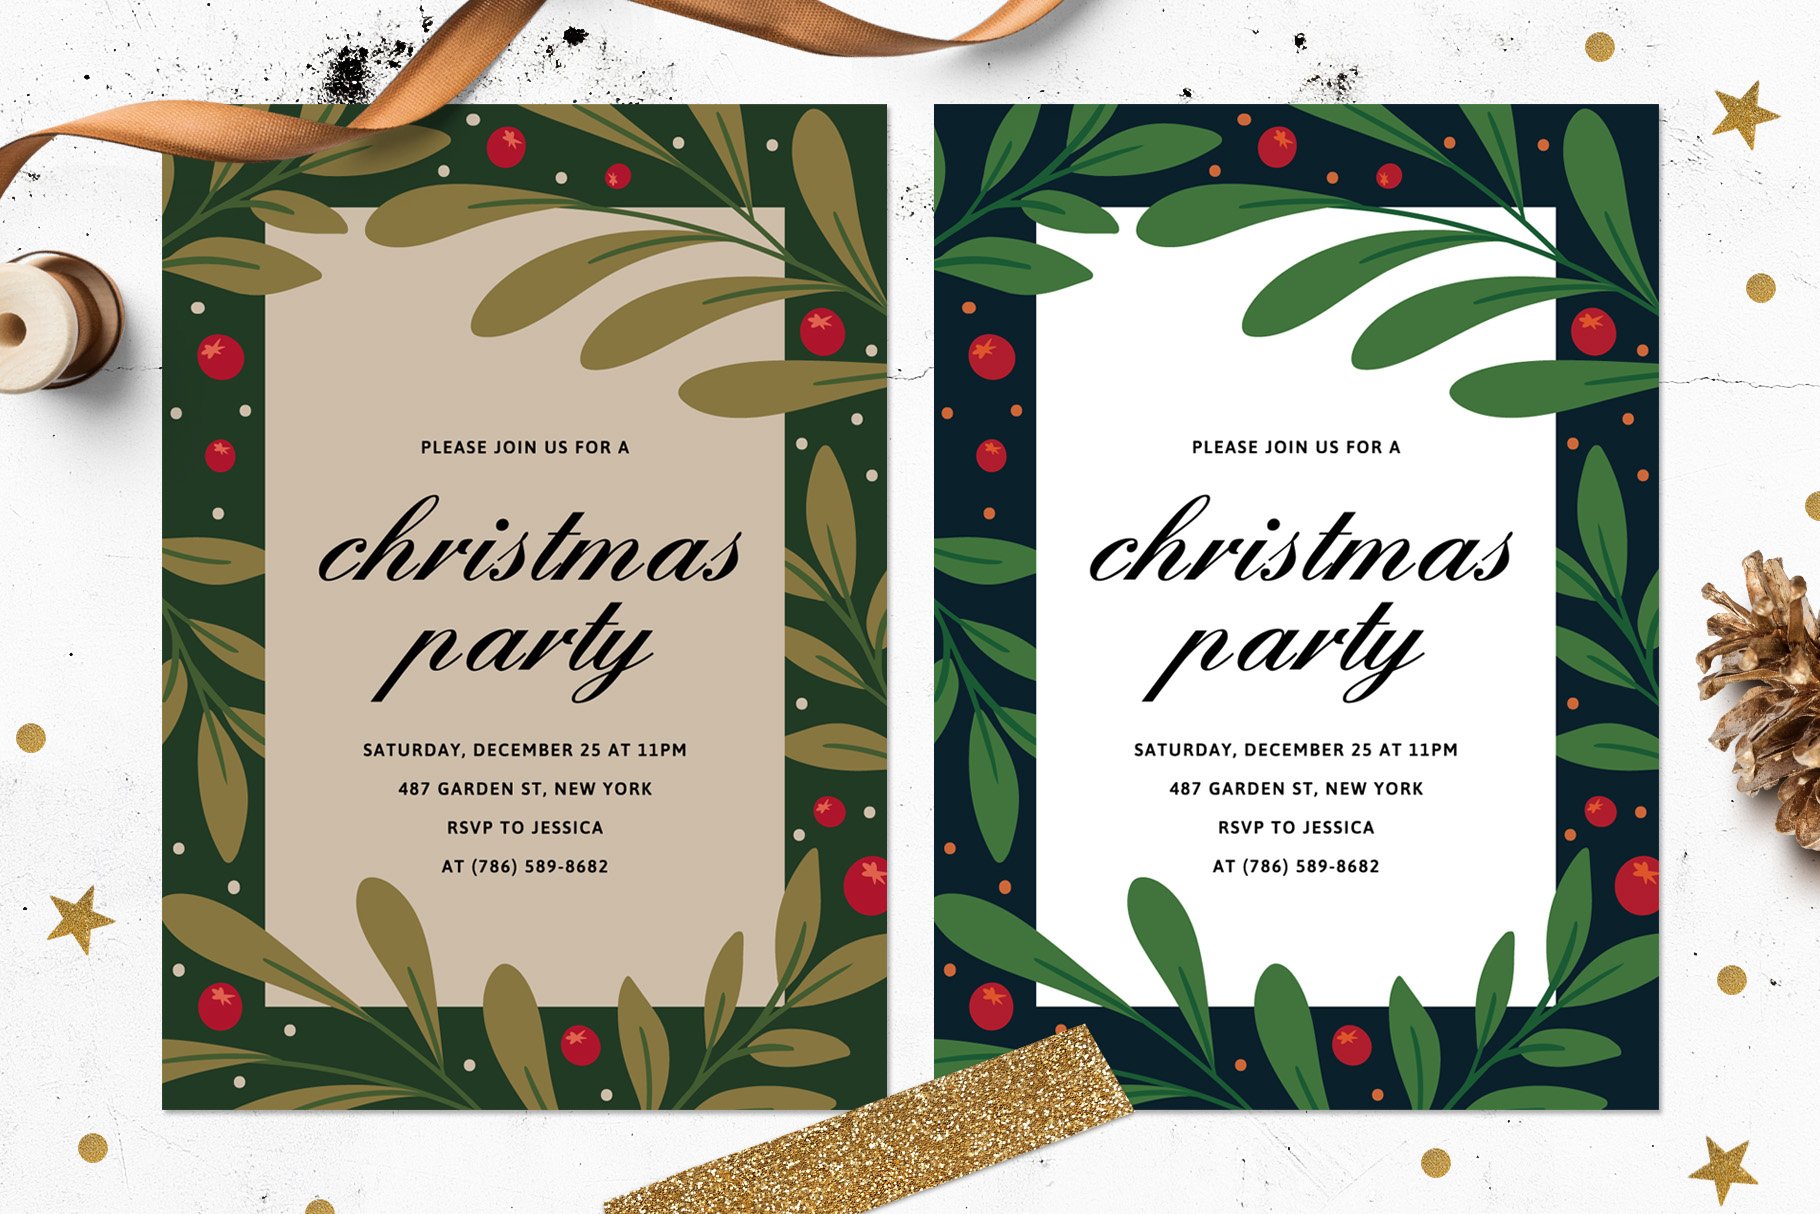 Fun Christmas Party Invitation cover image.